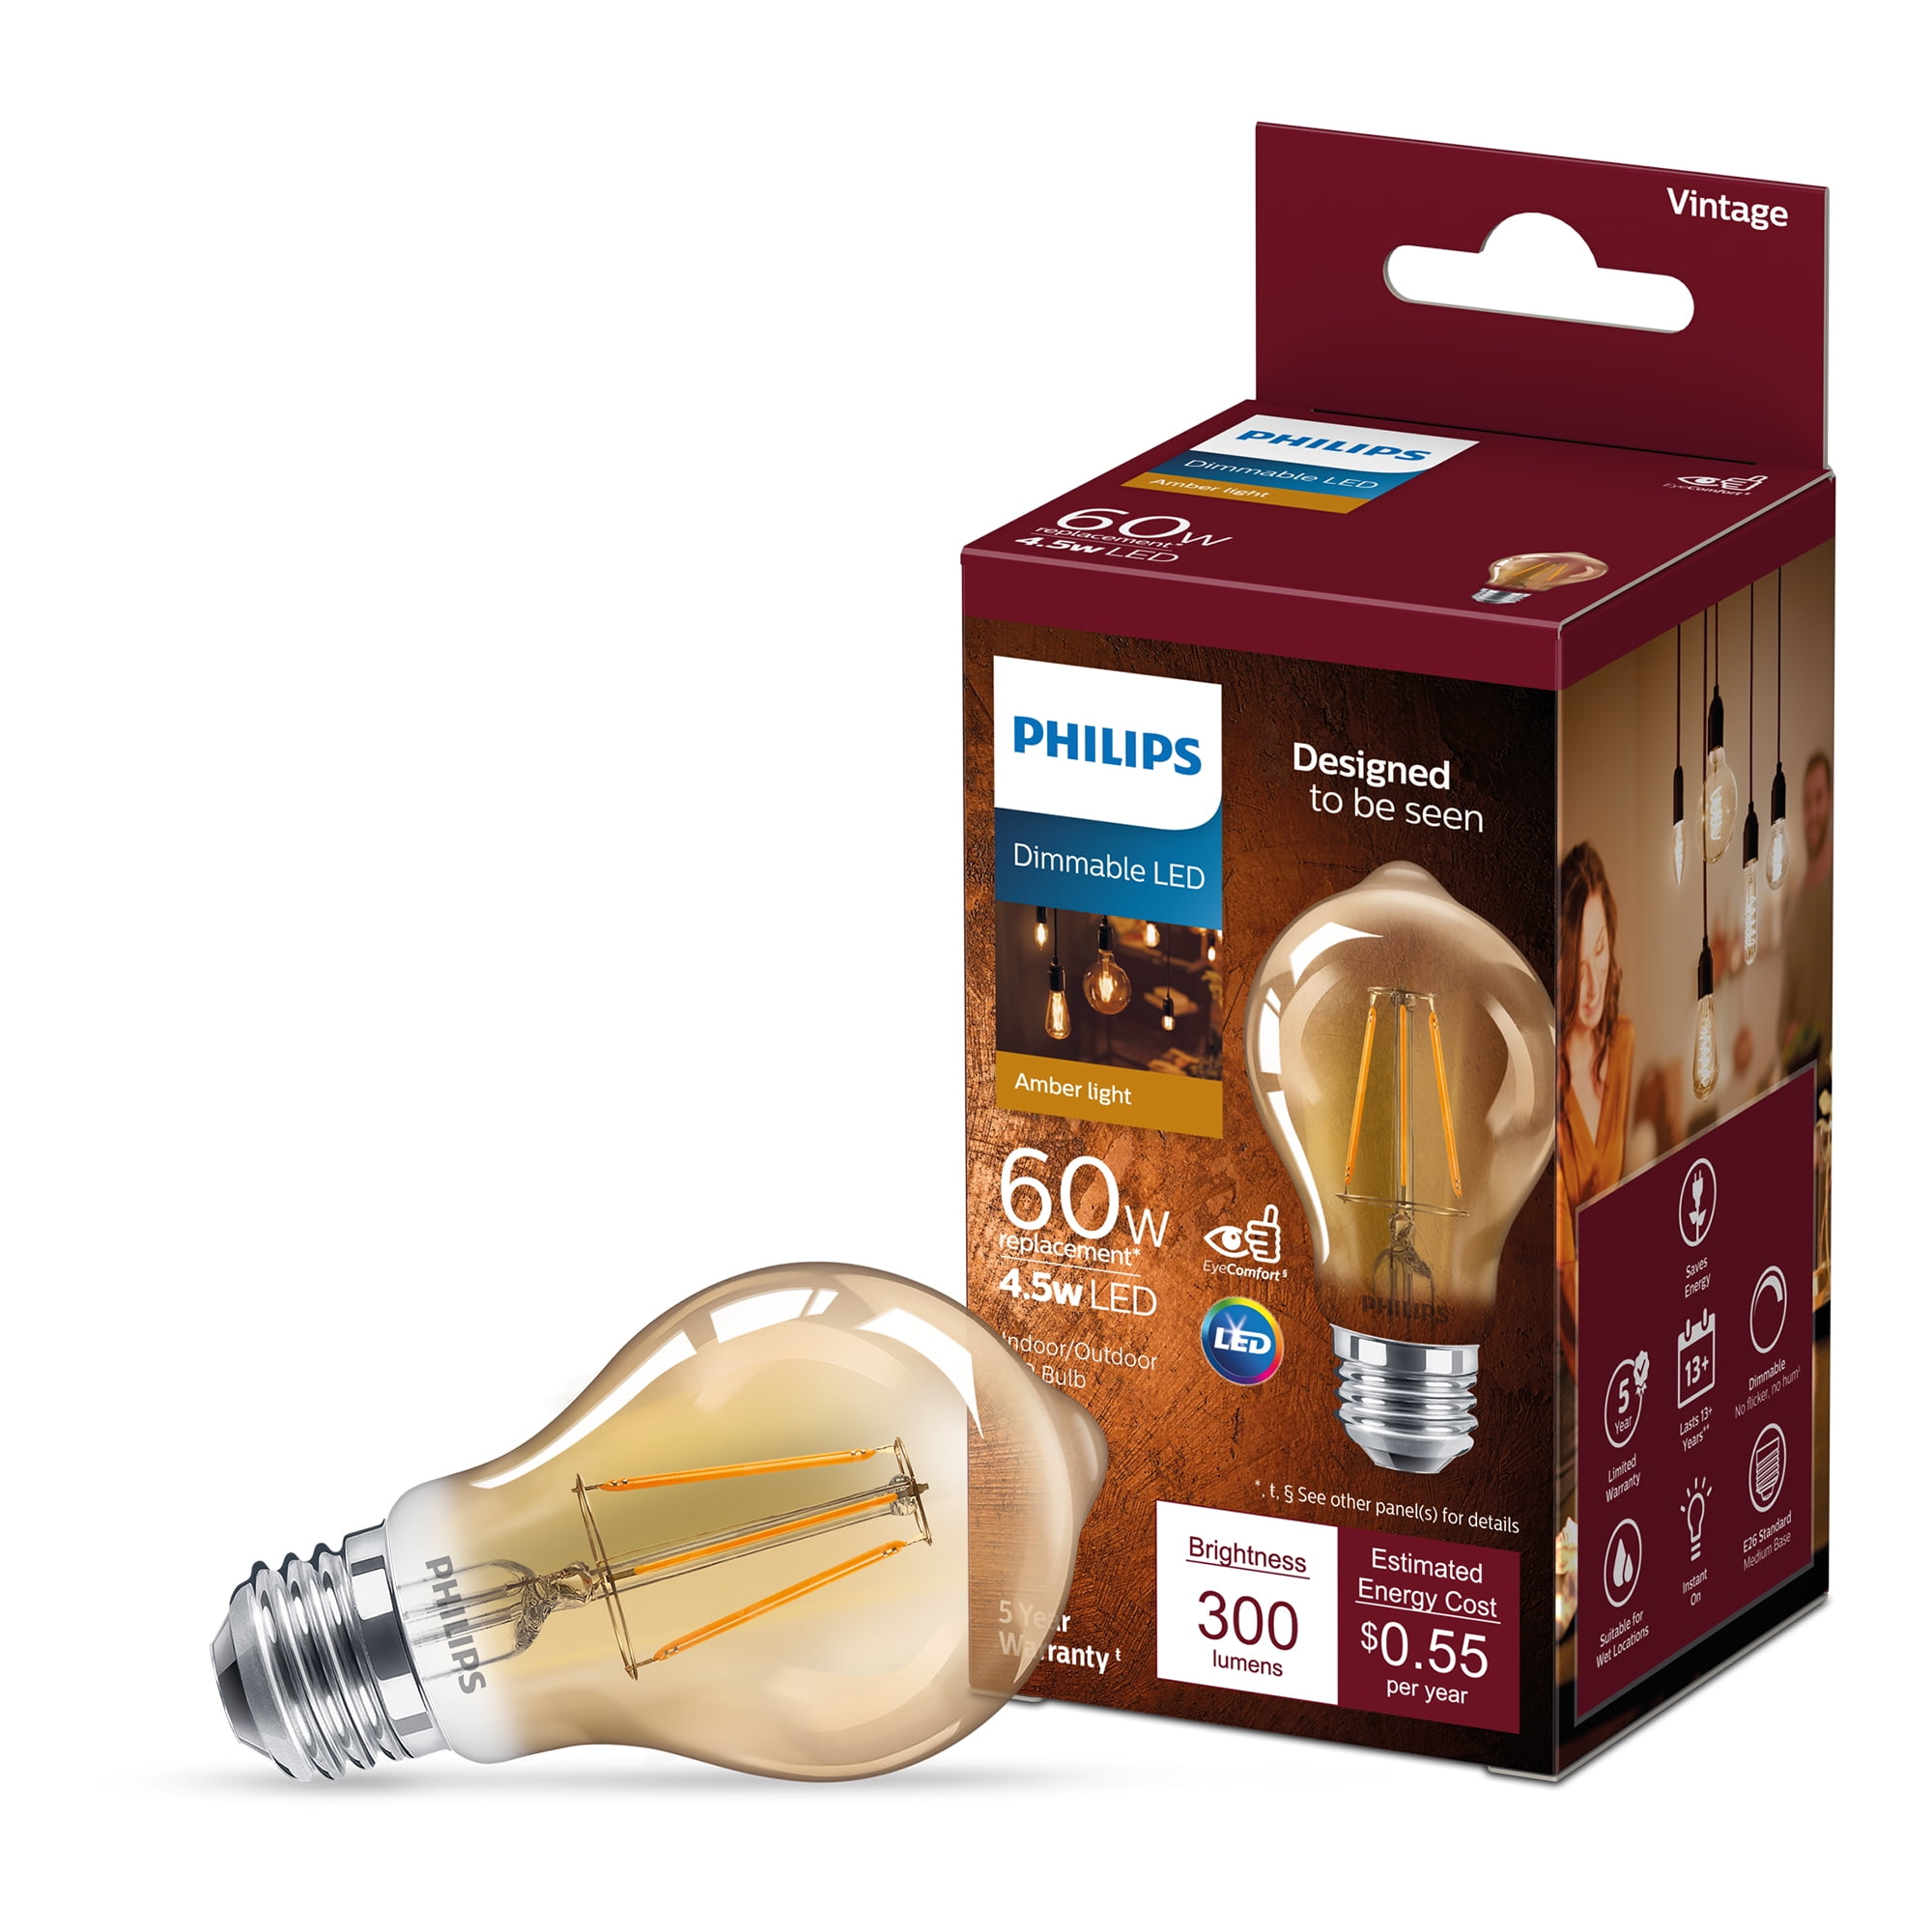 Philips Vintage LED 60W General A19 Filament Lightbulb, Clear Amber, Dimmable, E26 Base (1-Pack): - Walmart.com